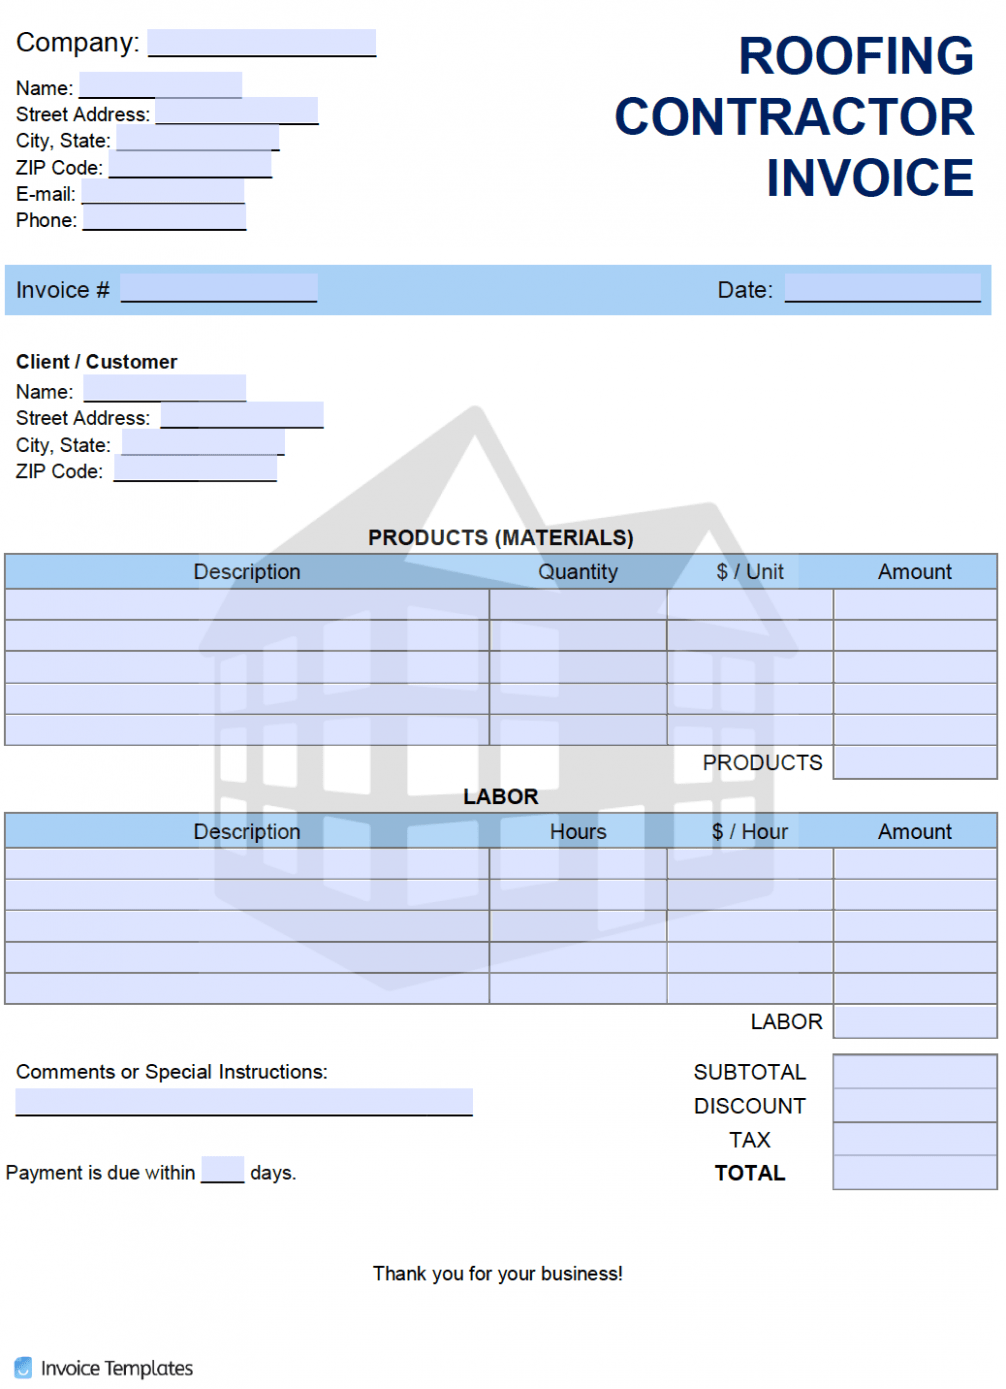 Sample Roofing Contractor Invoice Template PPT